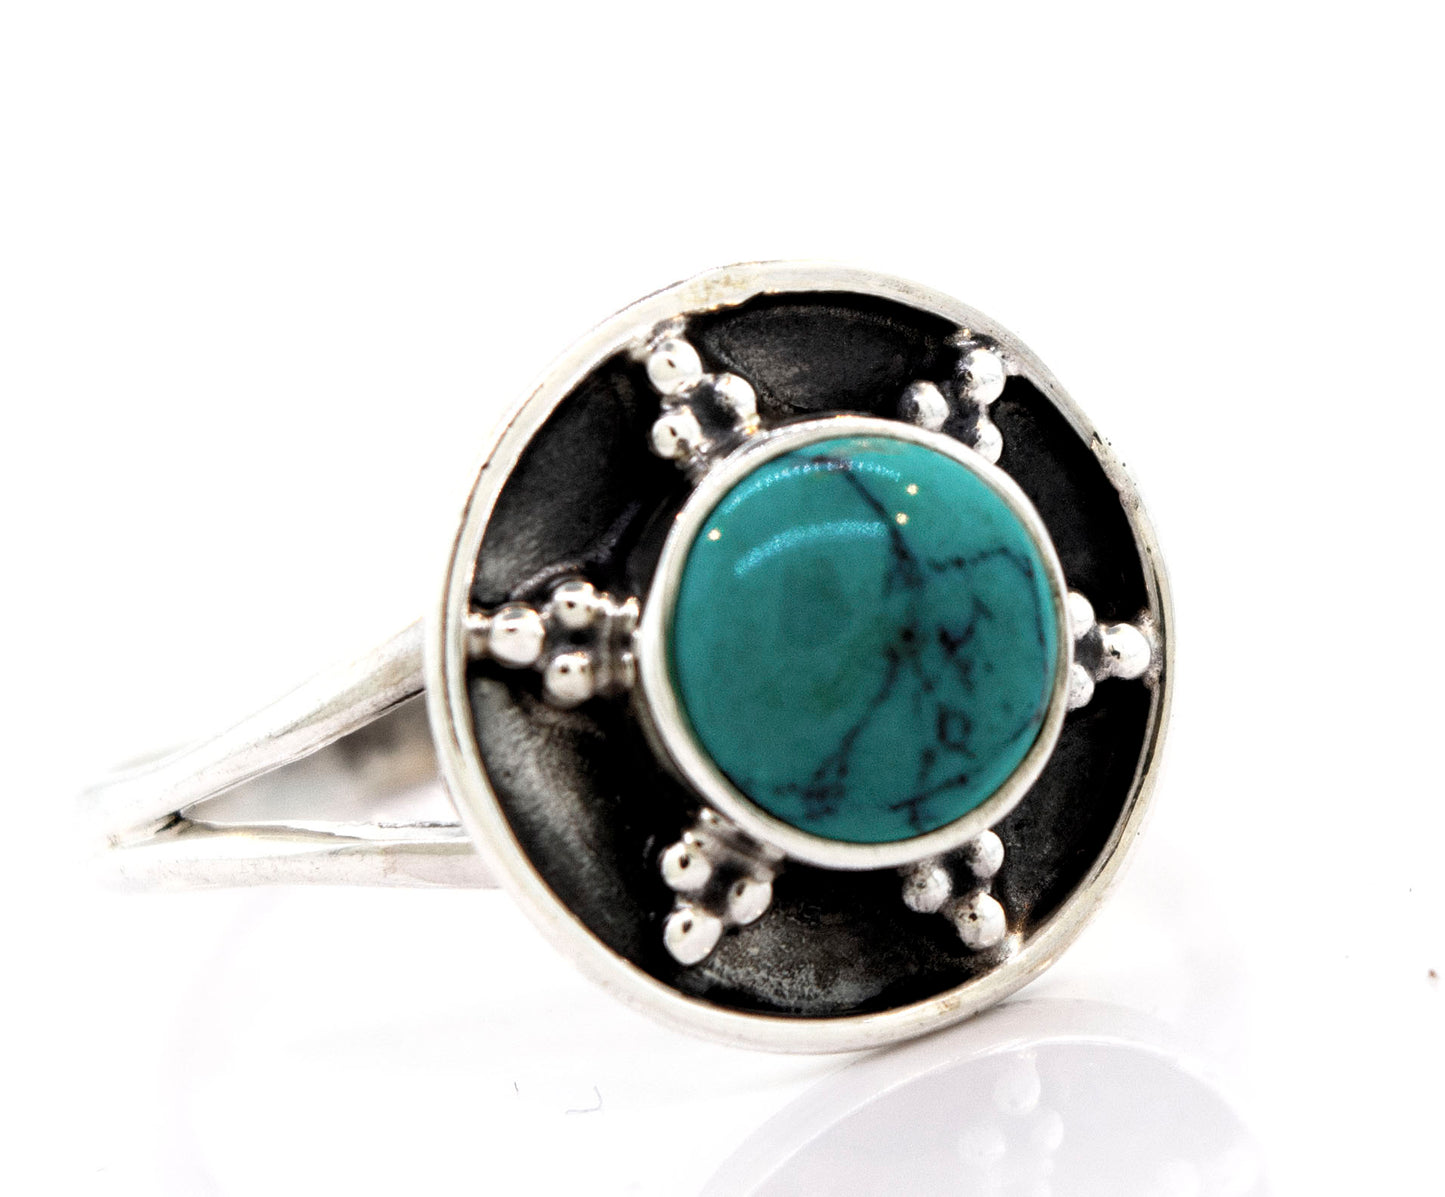 A Turquoise Ring With Unique Oxidized Silver Design from Super Silver.